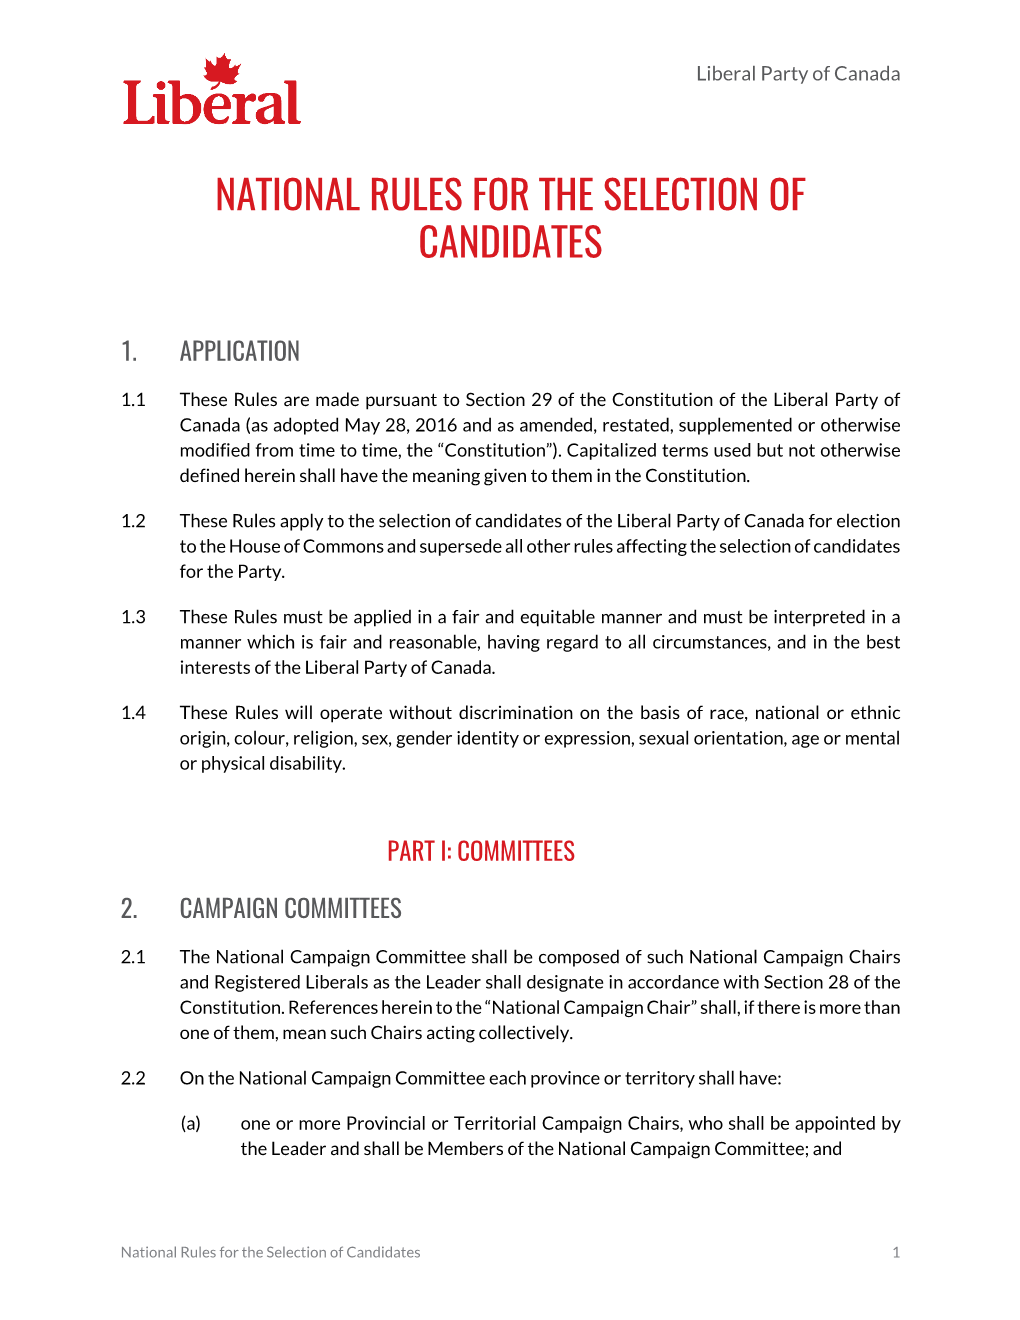 National Rules for the Selection of Candidates